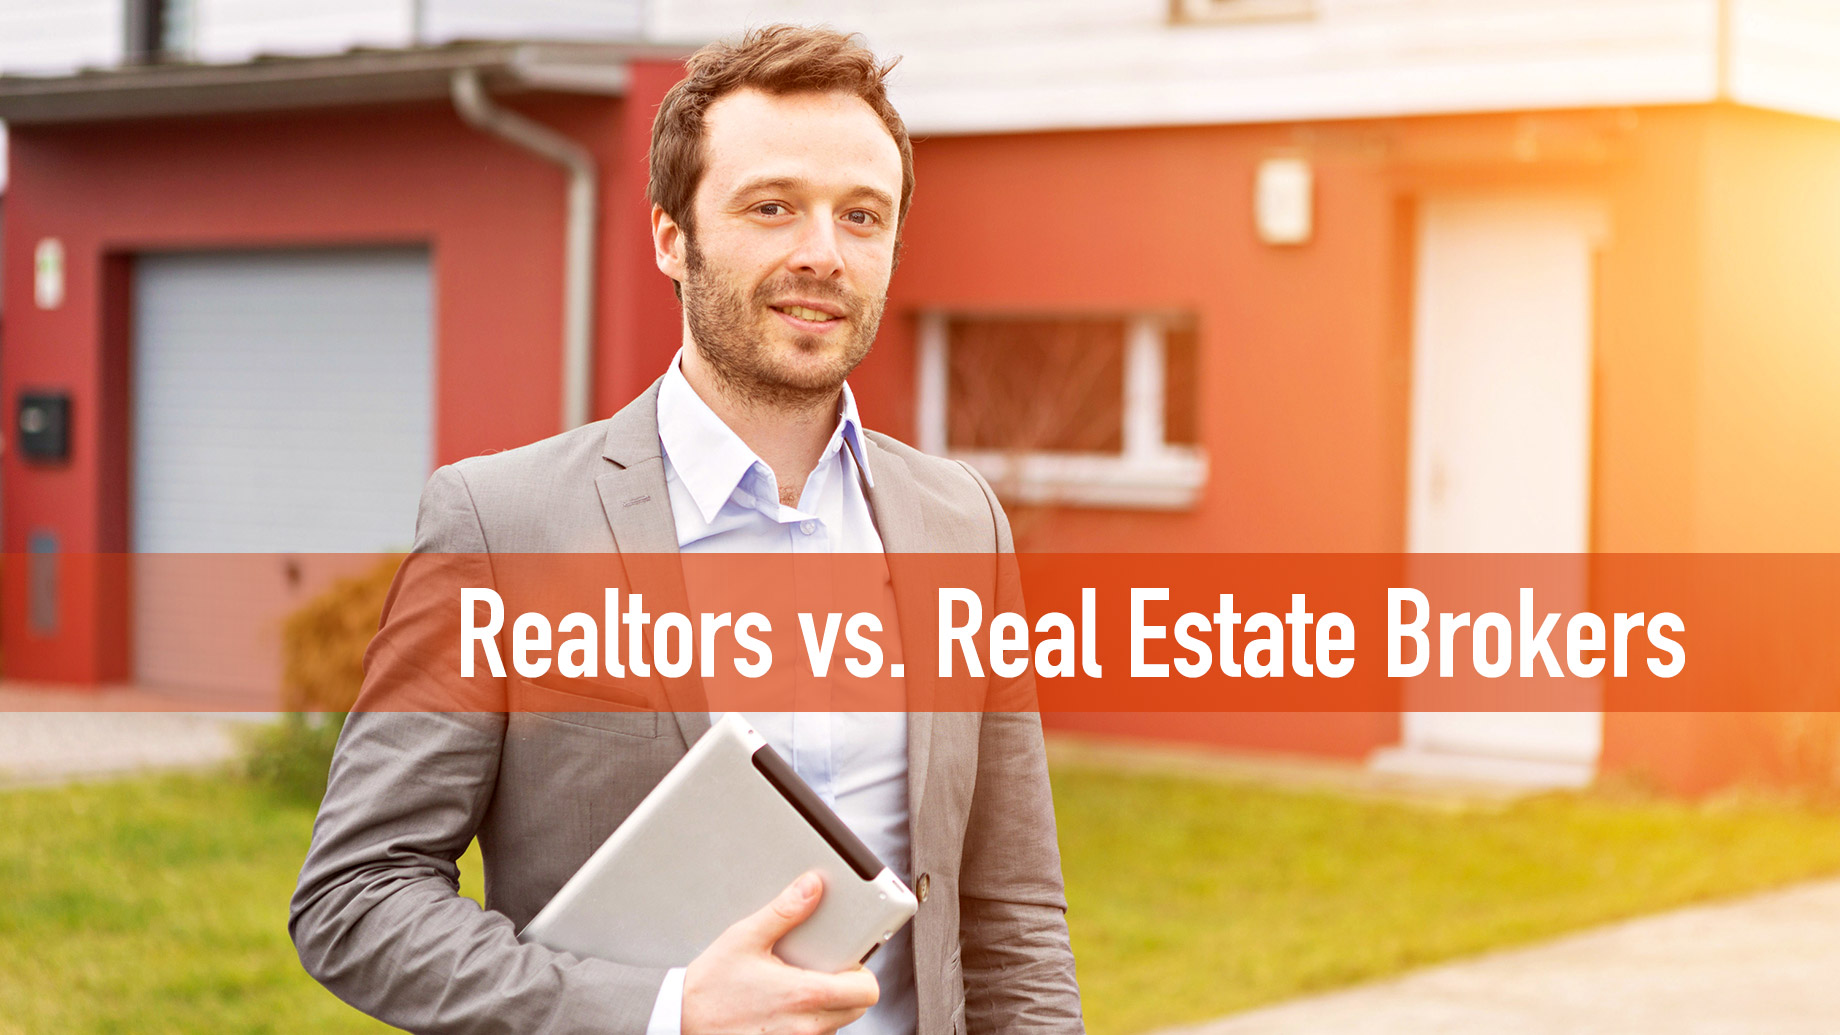 Realtors vs. Real Estate Brokers - What's the Difference?